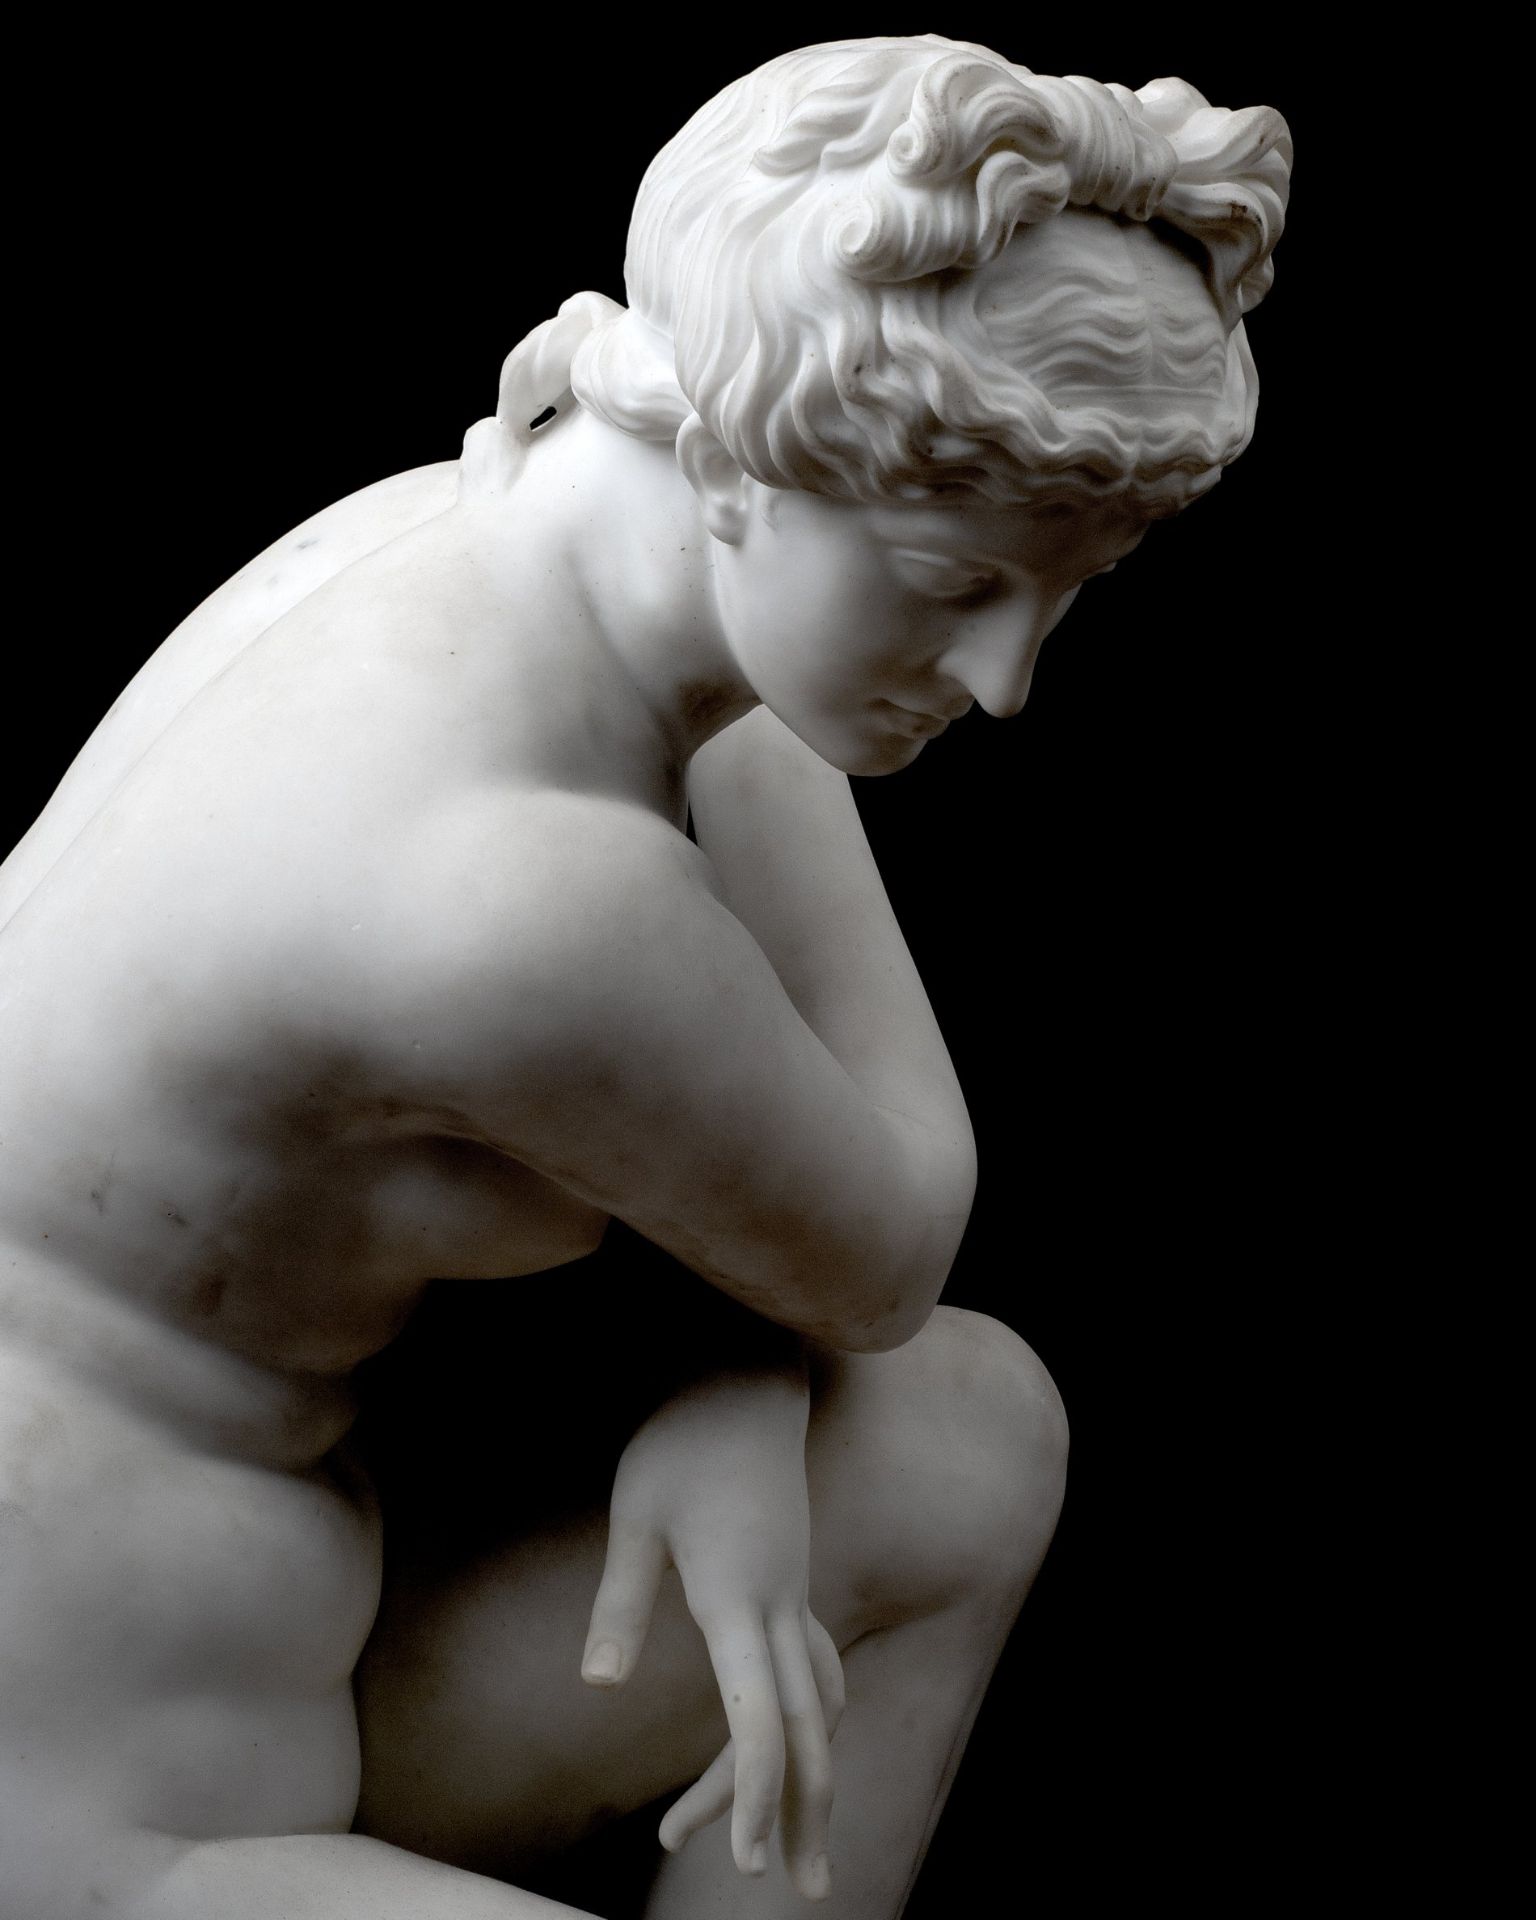 A LIFE-SIZE EARLY 20TH CENTURY ITALIAN MARBLE FIGURE OF THE CROUCHING VENUS